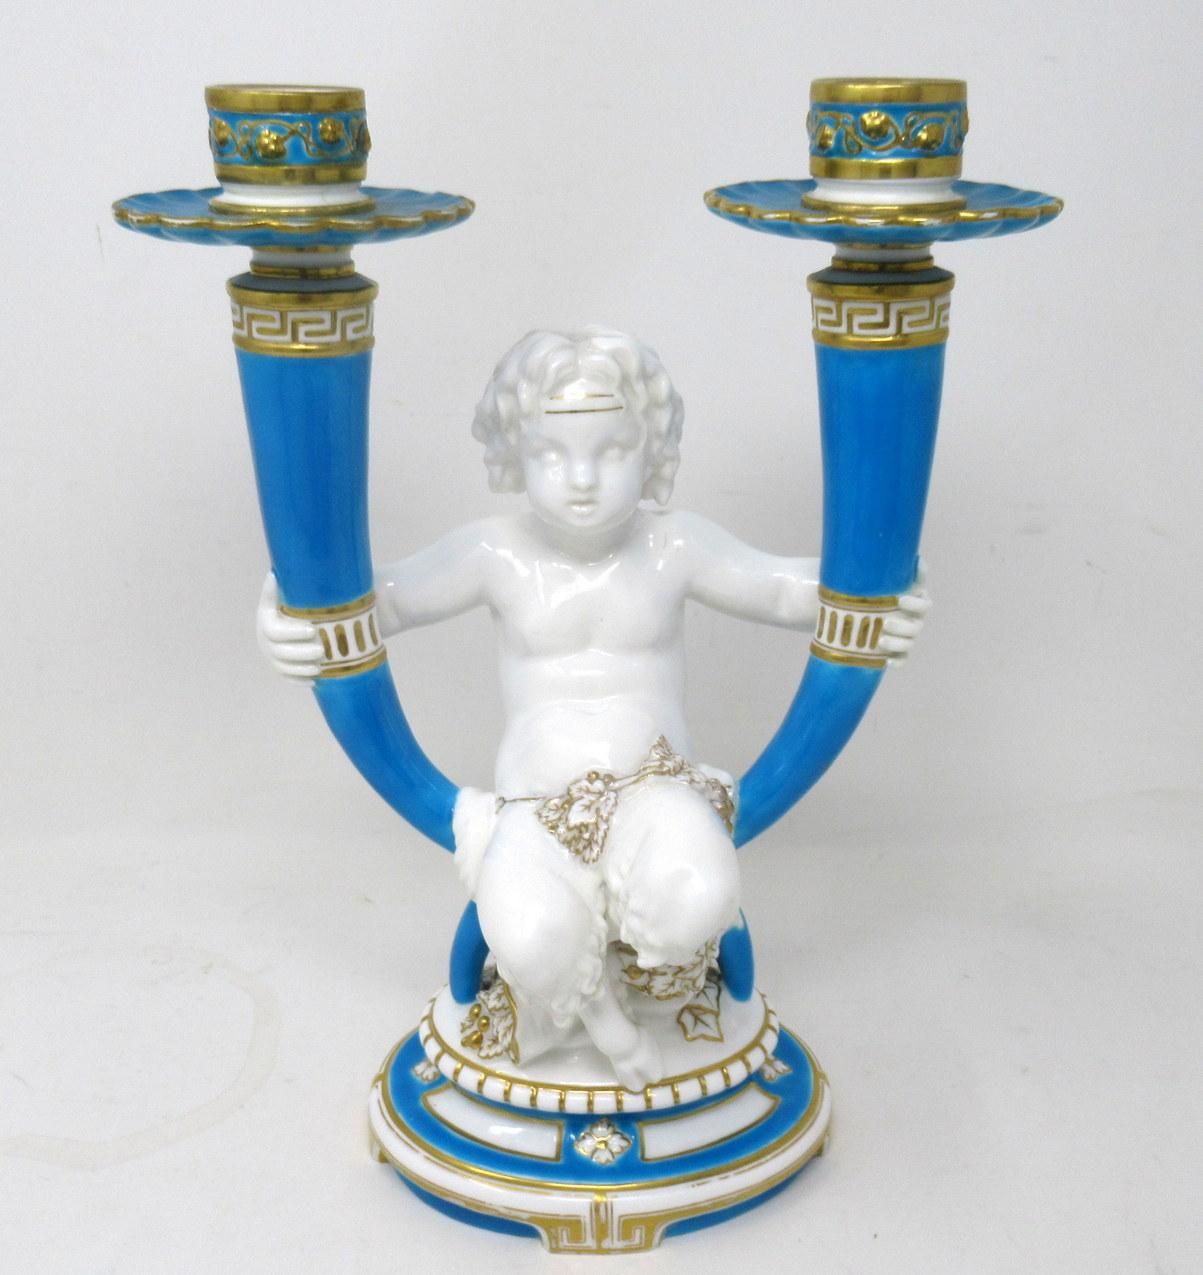 Stunning Example of a single English Minton Porcelain Two Branch Candelabra, modelled as a Cherub holding on each hand an out swept candle holder, seated on an oval base above an elaborate footed stand. Circa third quarter of the Nineteenth Century,